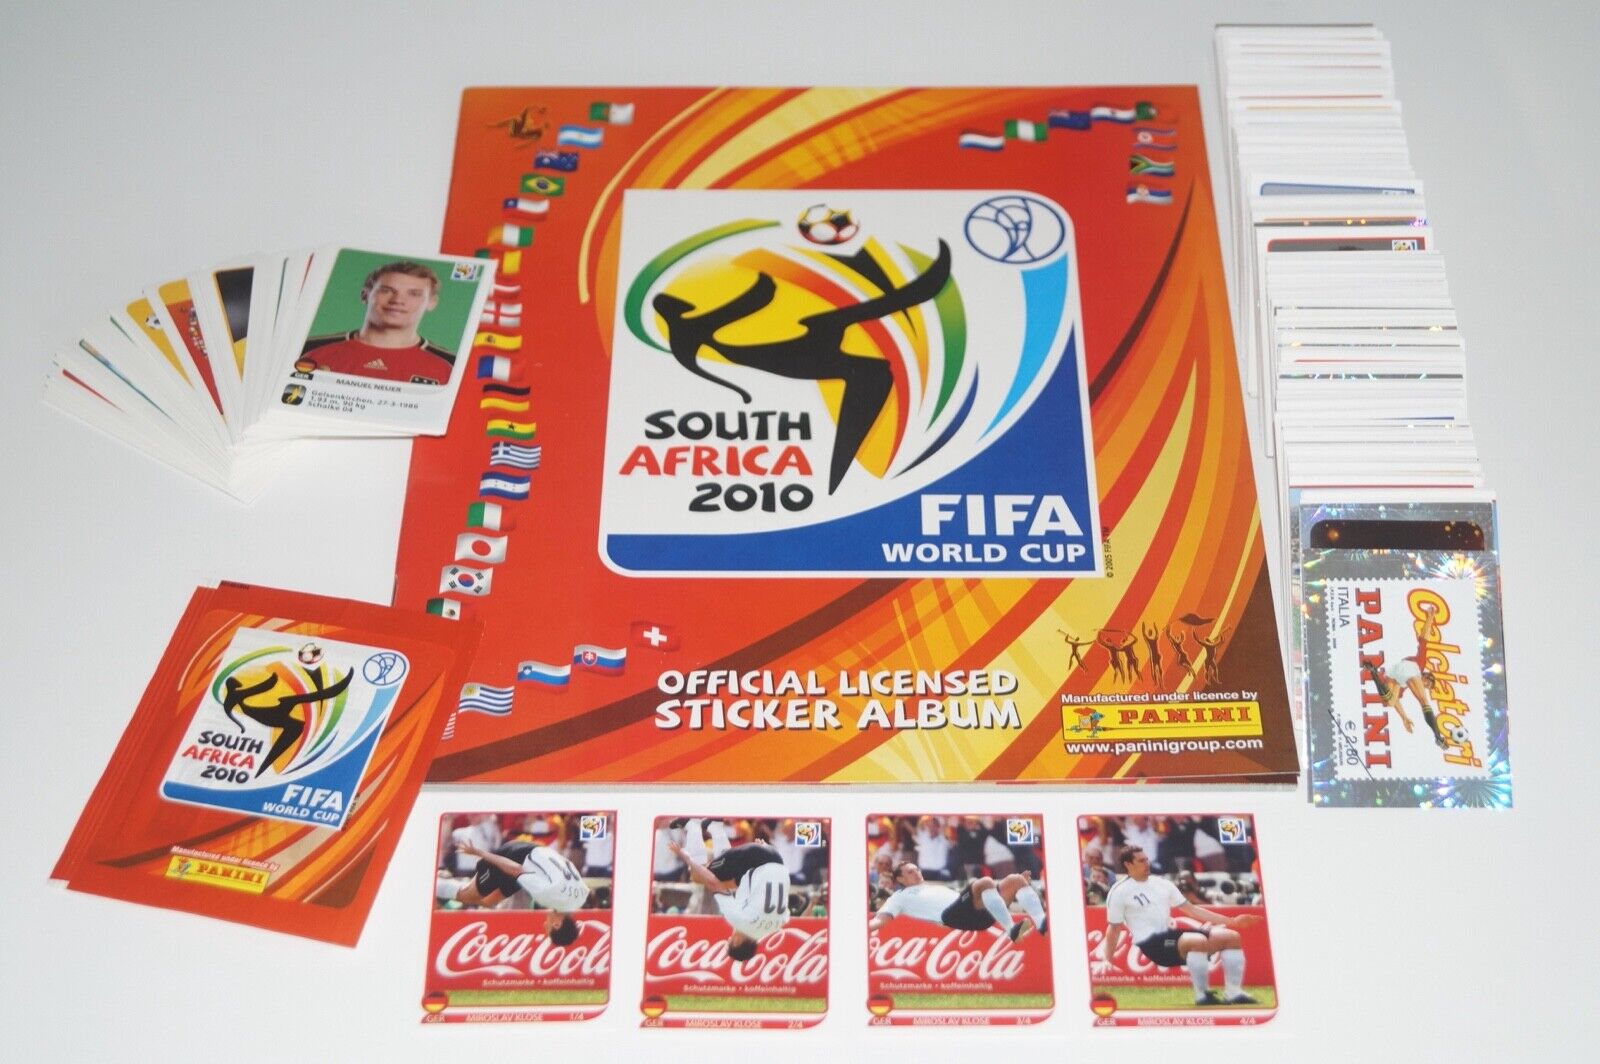 PANINI World Cup 2010 South Africa 10 - complete set + album + 4 toilets + 80 updates